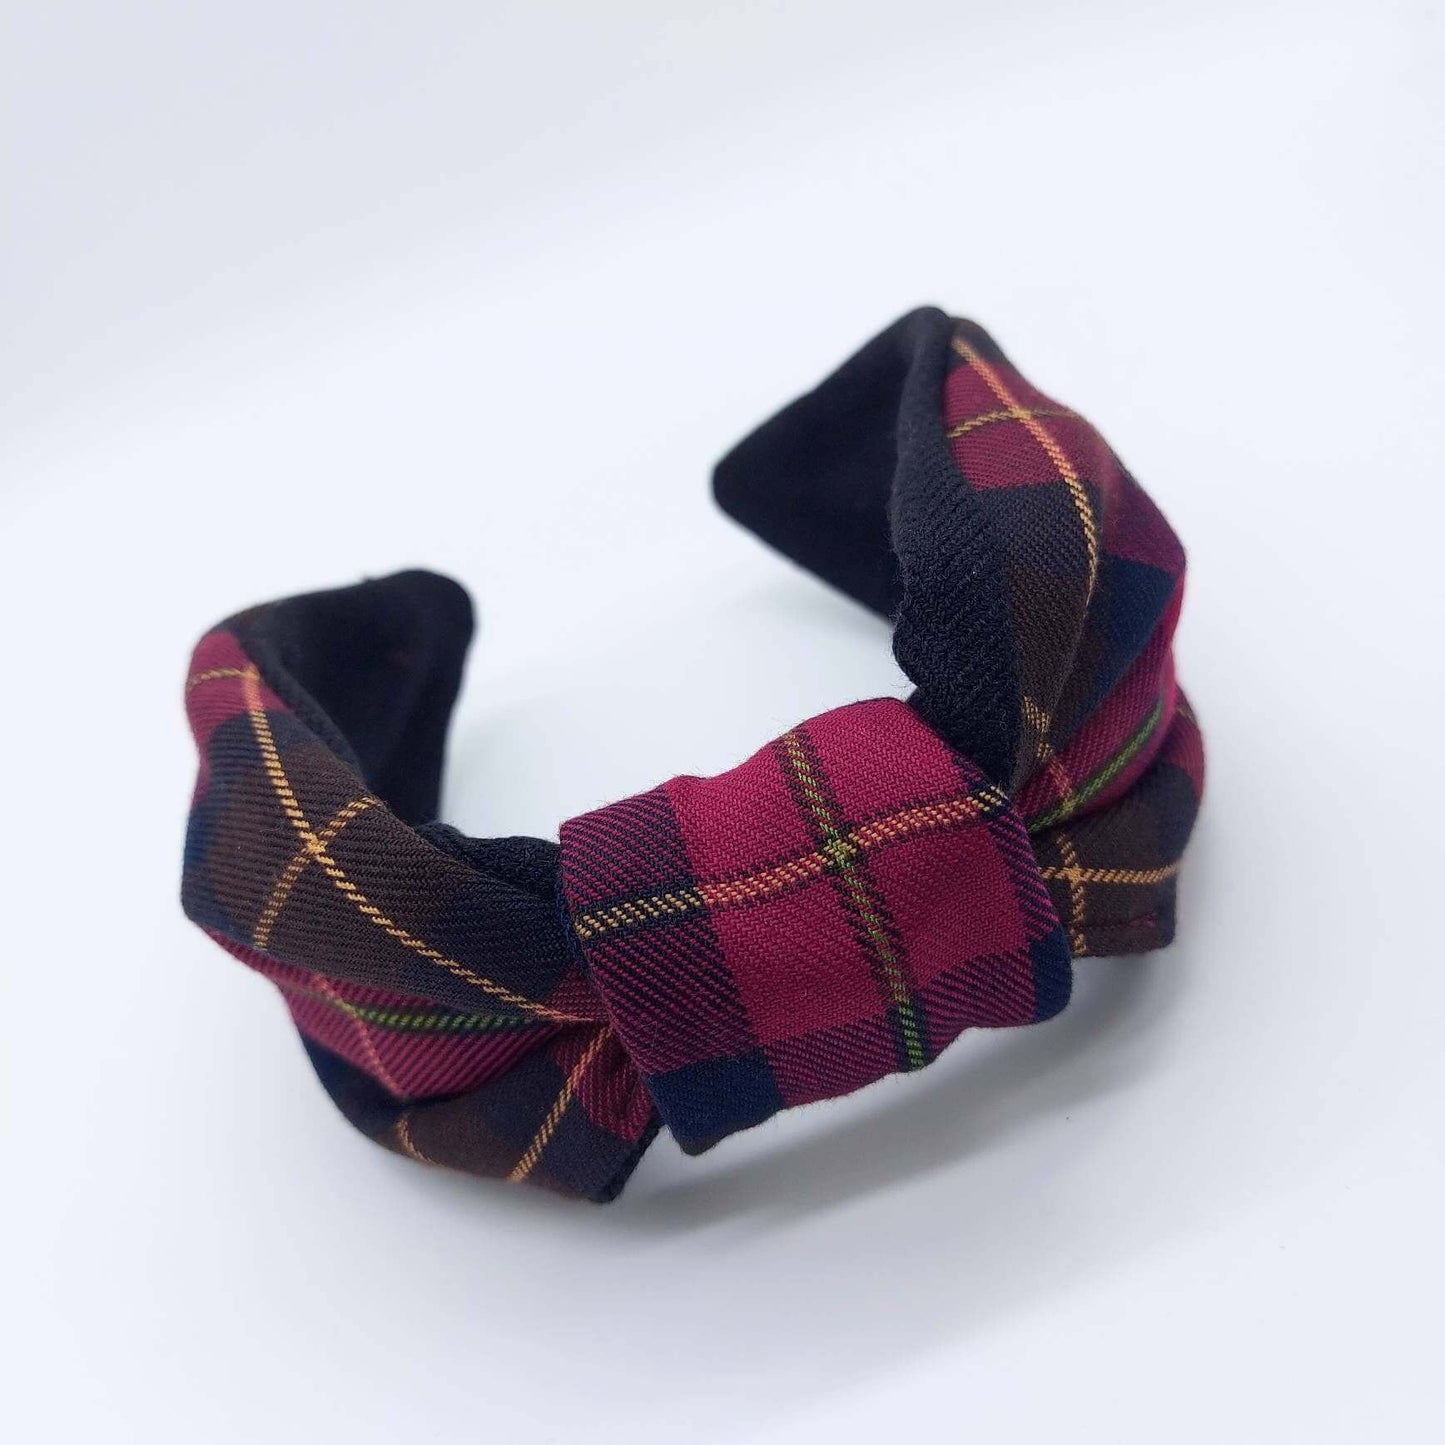 A bow-style, brown and red tartan plaid fabric knot headband with plain black lining underneath.